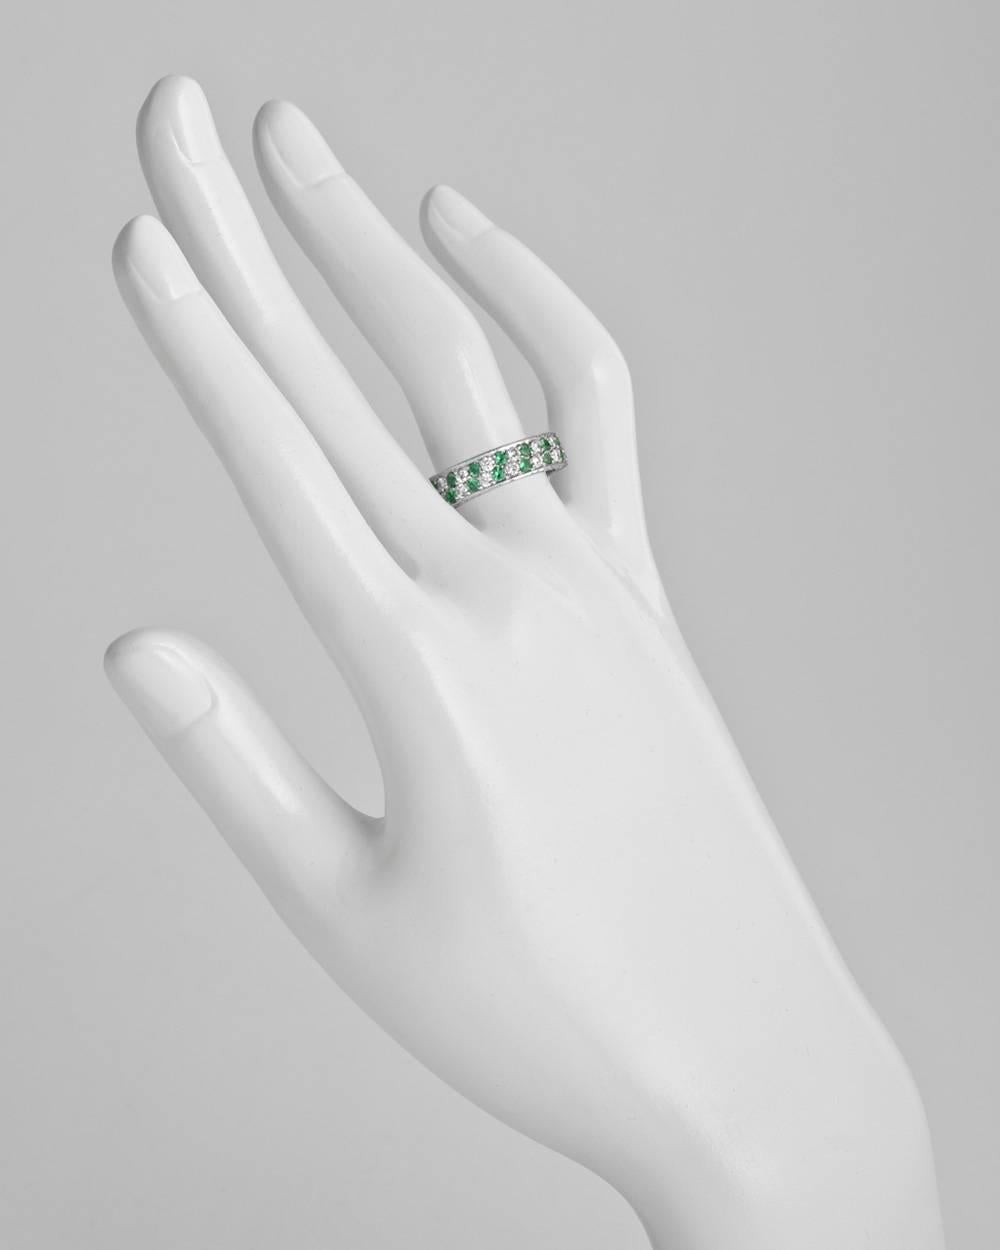 Diamond and emerald partial band ring composed of two rows of alternating pavé-set diamonds and emeralds in a slight diagonal pattern, with pavé set diamond top and bottom profiles, in platinum. Diamonds weighing approximately 1.25 total carats.